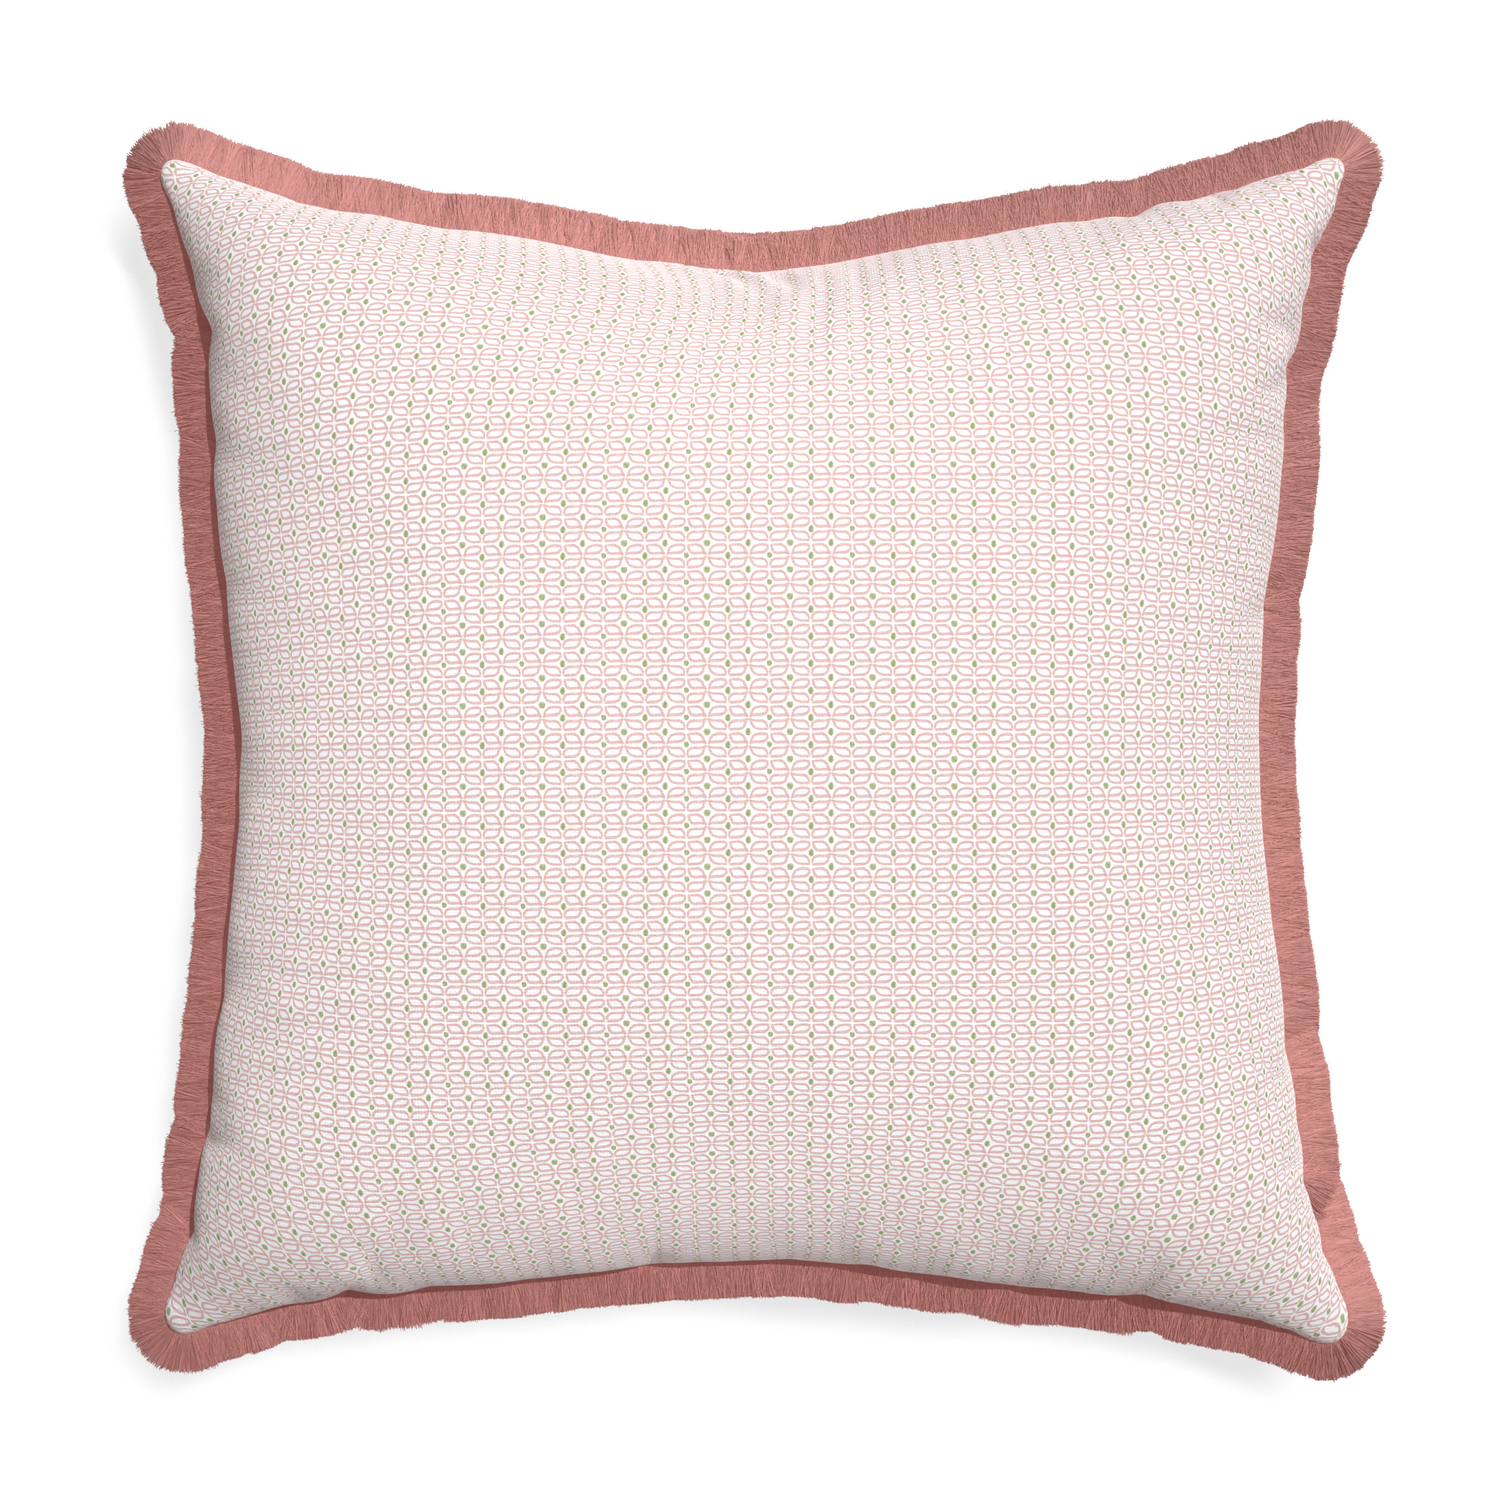 Euro-sham loomi pink custom pink geometricpillow with d fringe on white background